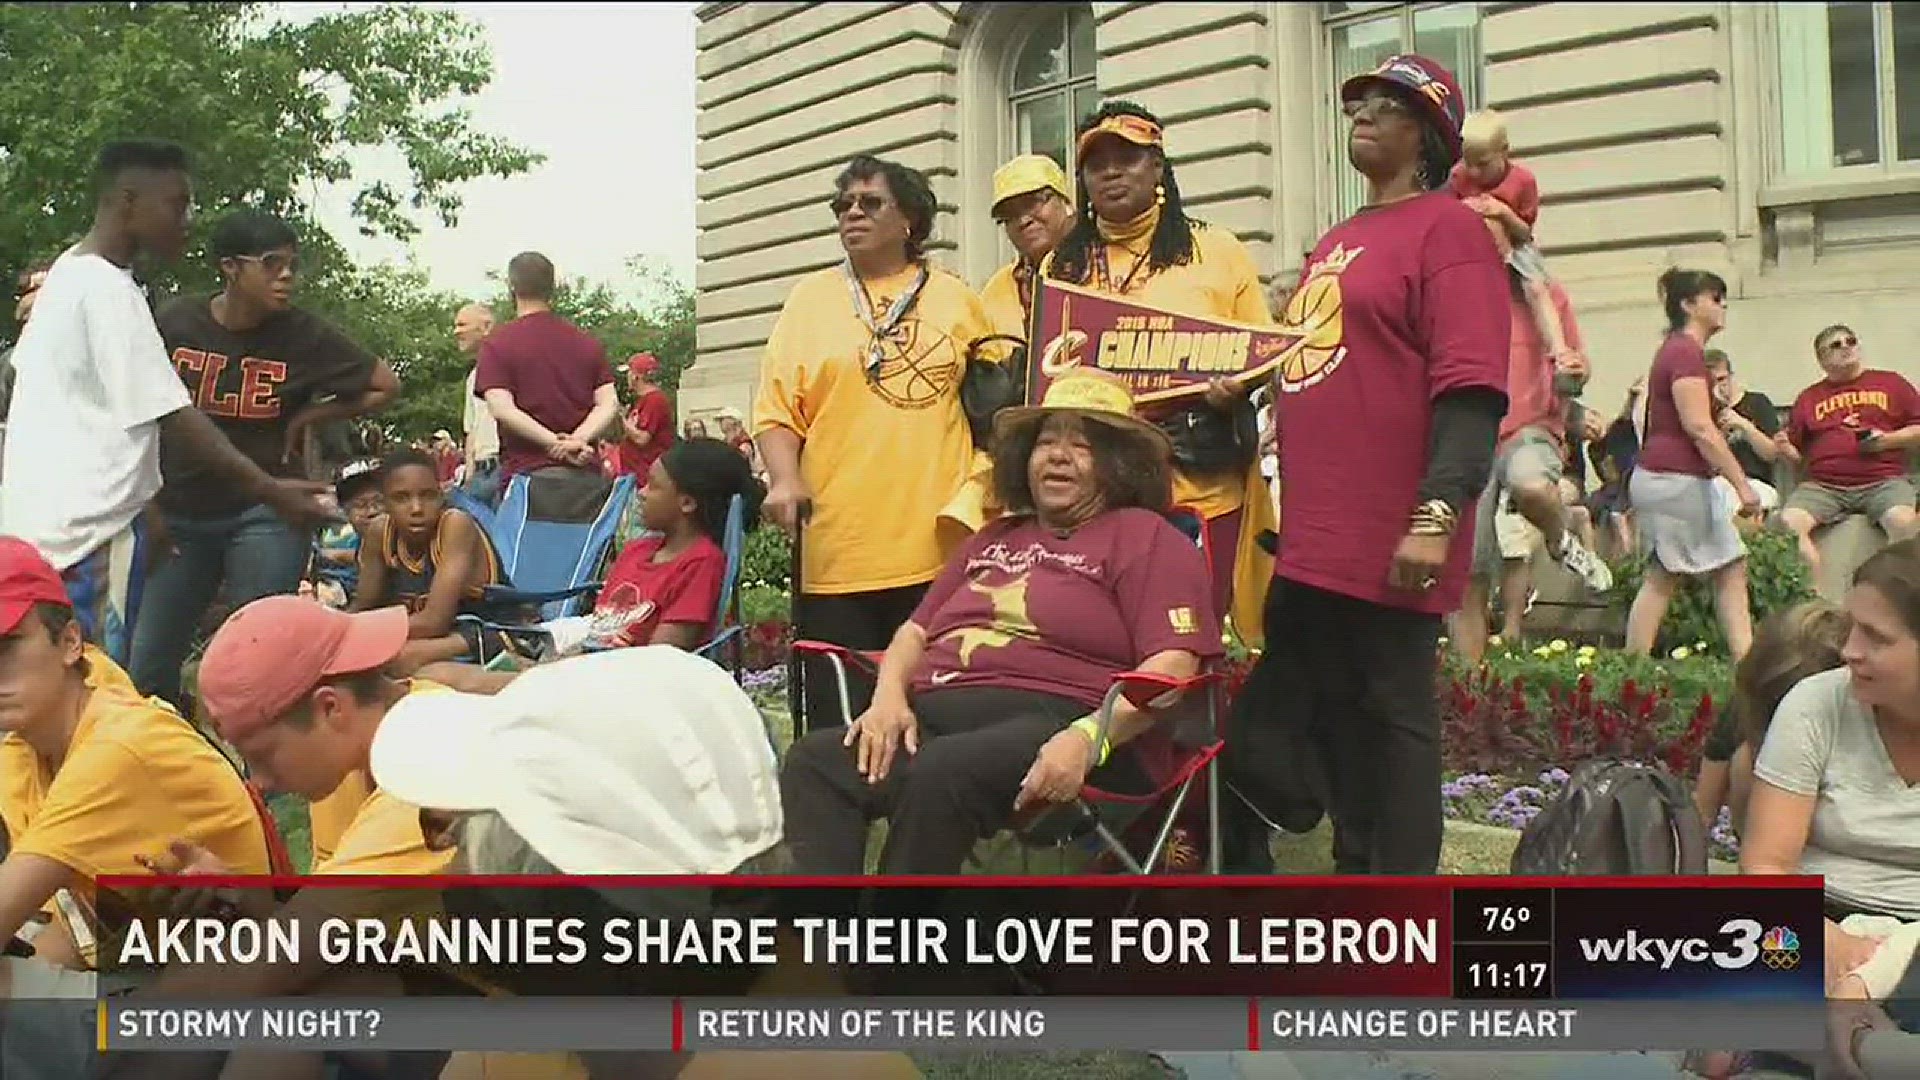 Akron grannies share their love for LeBron